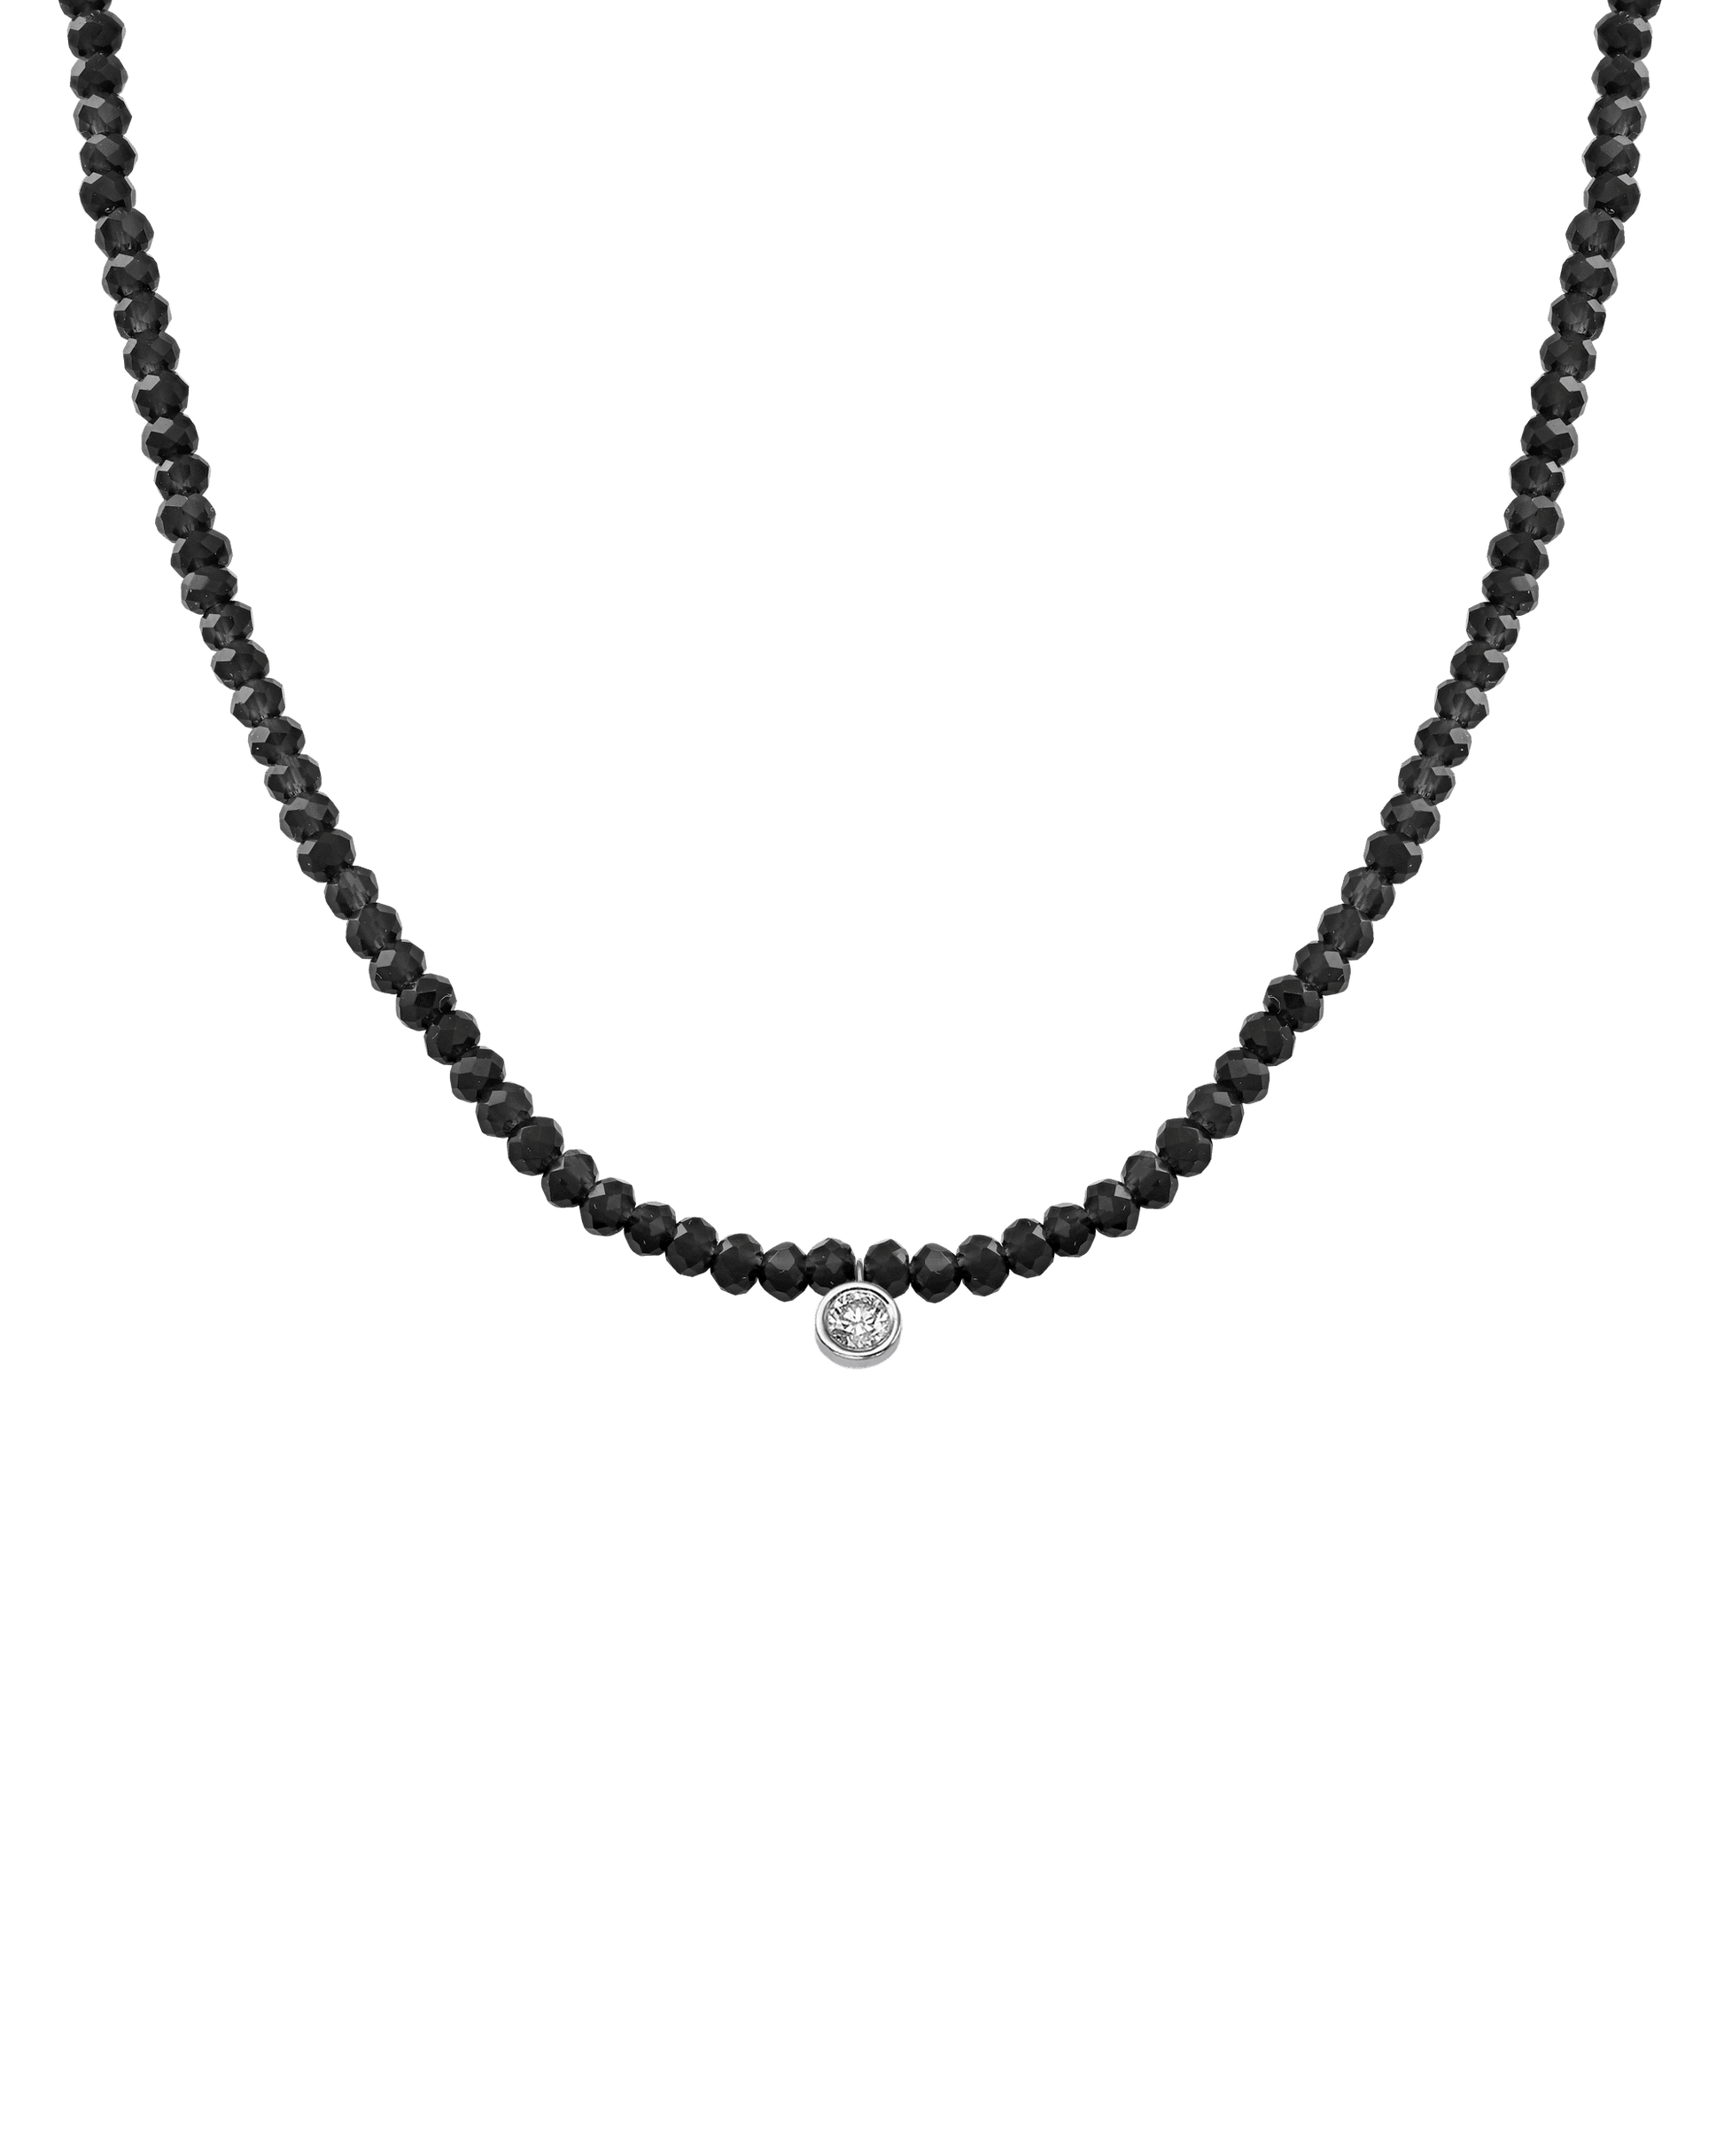 Apatite Gemstone & Diamond Necklace - 14K White Gold Necklaces 14K Solid Gold Glass Beads Black Spinnel Large: 0.10ct 14"